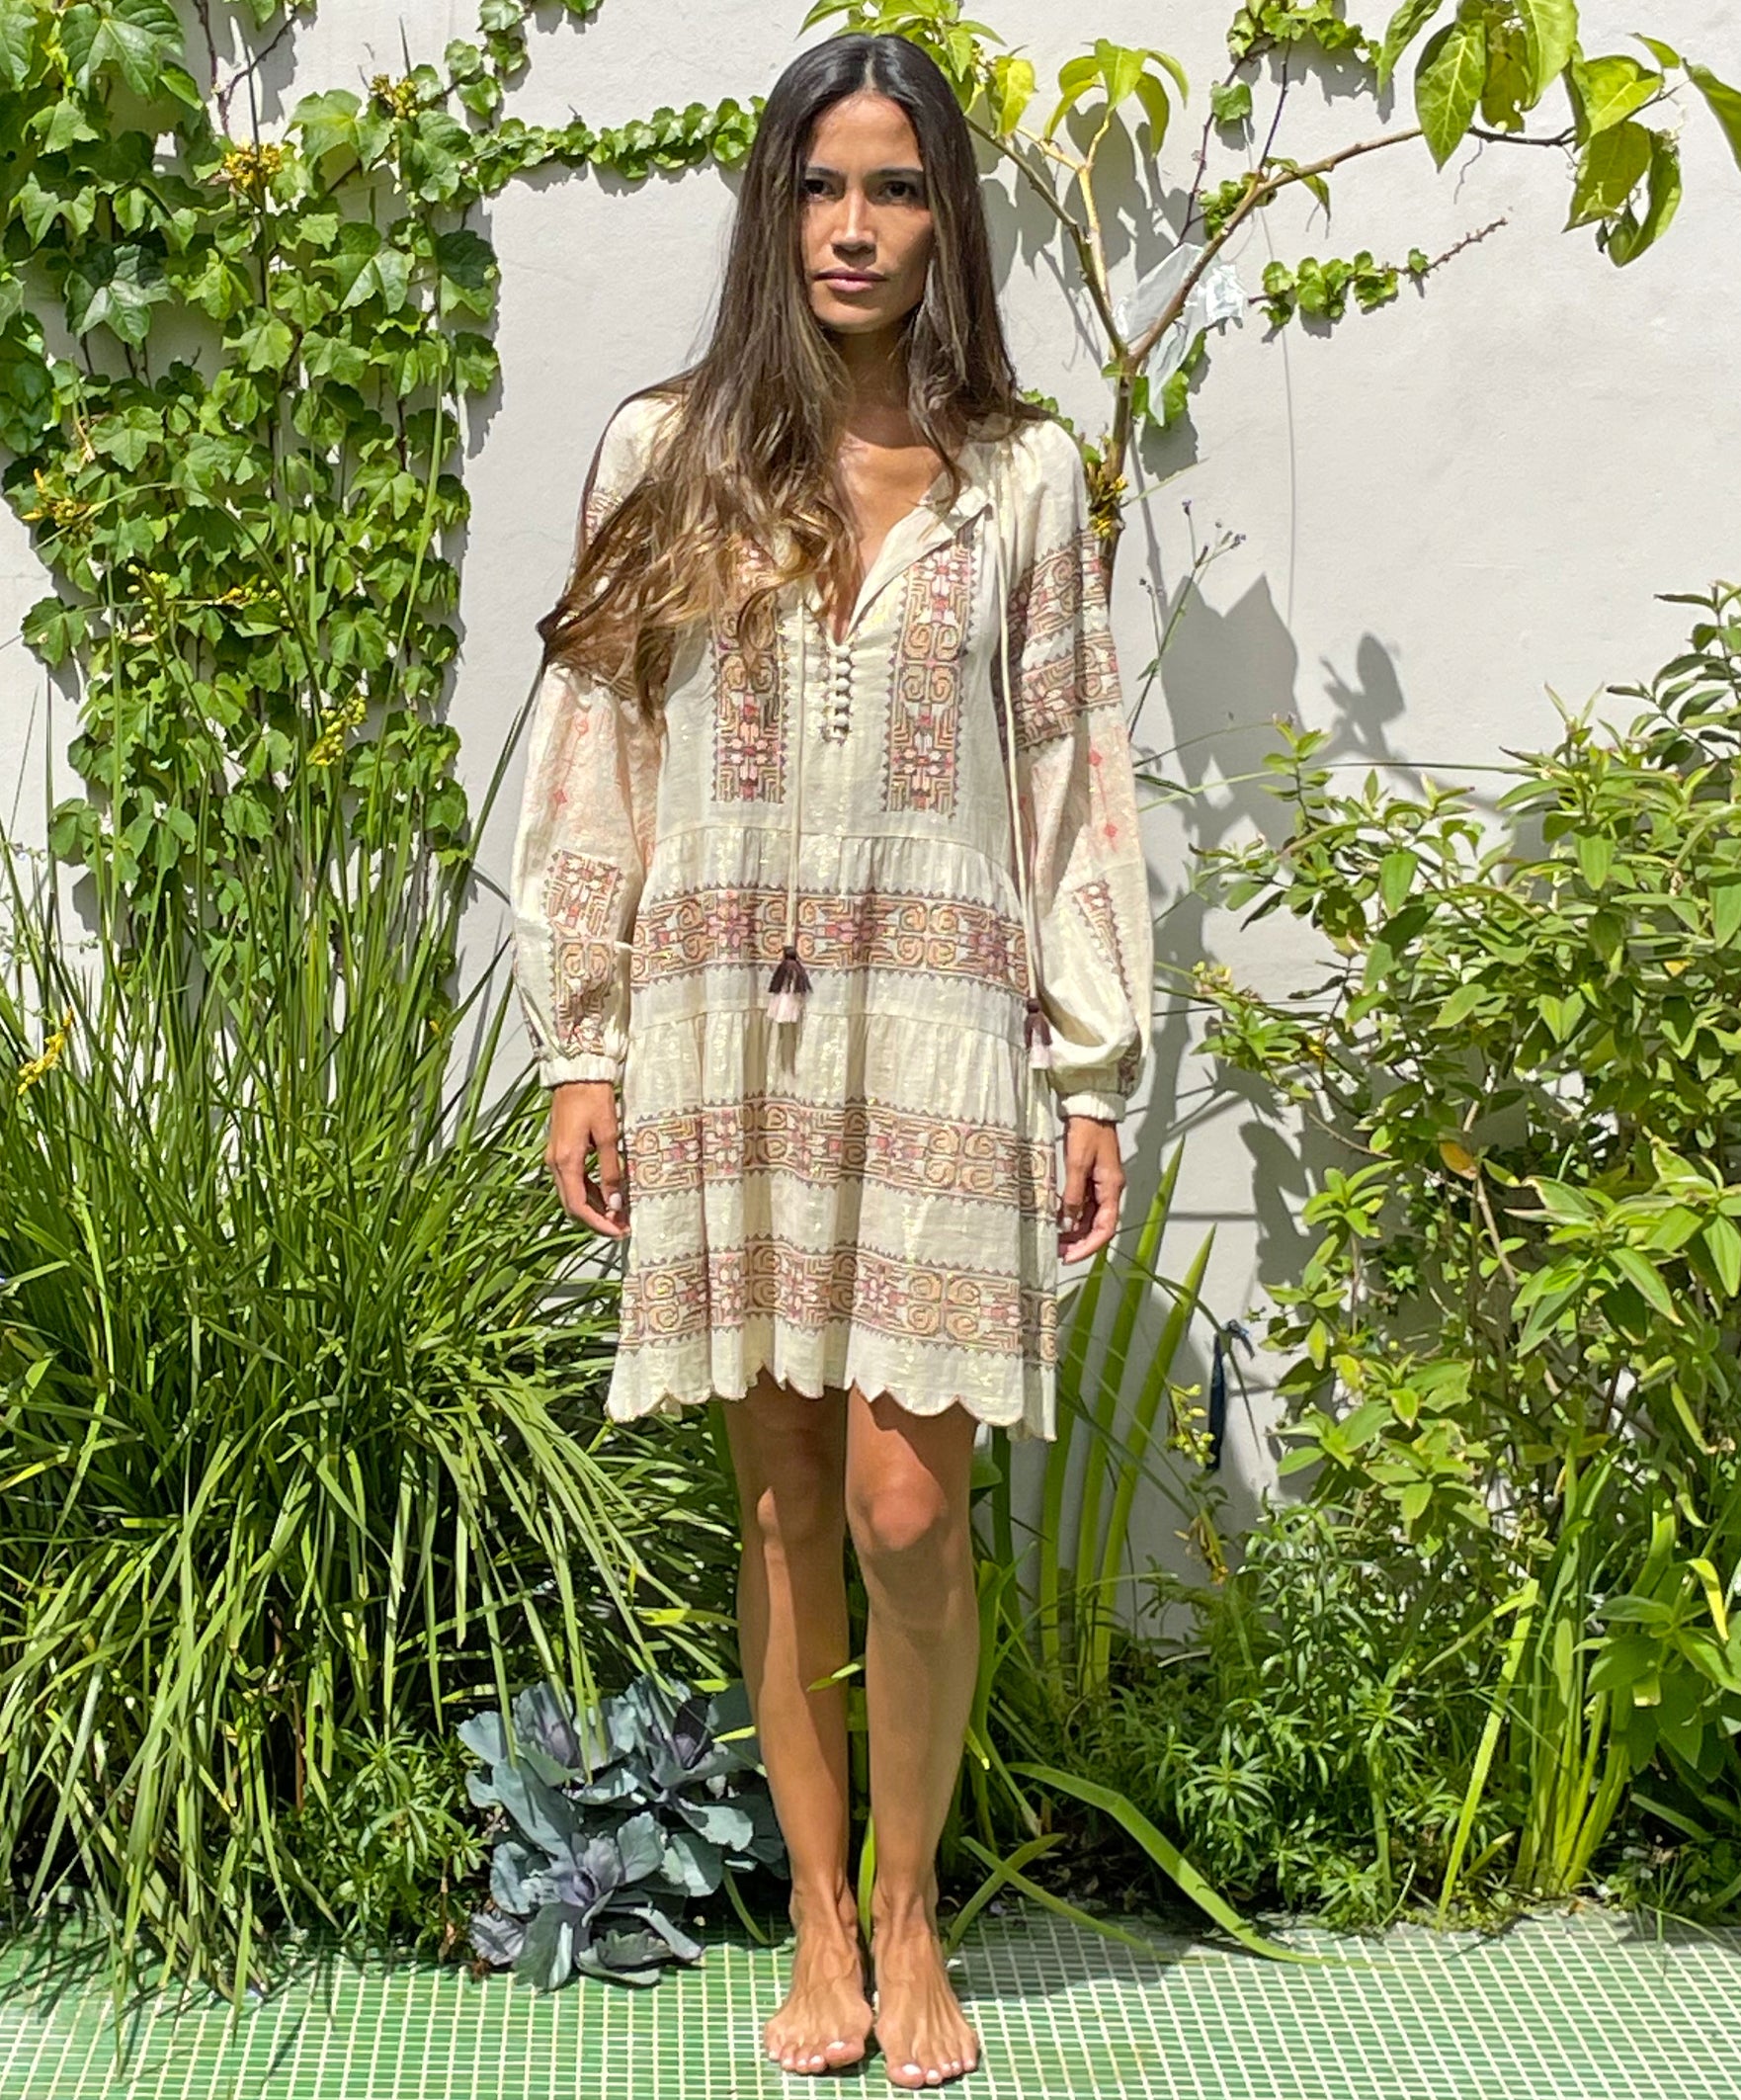 A model in a garden wearing the Rose and Rose Ravello gold lurex embroidered dress.